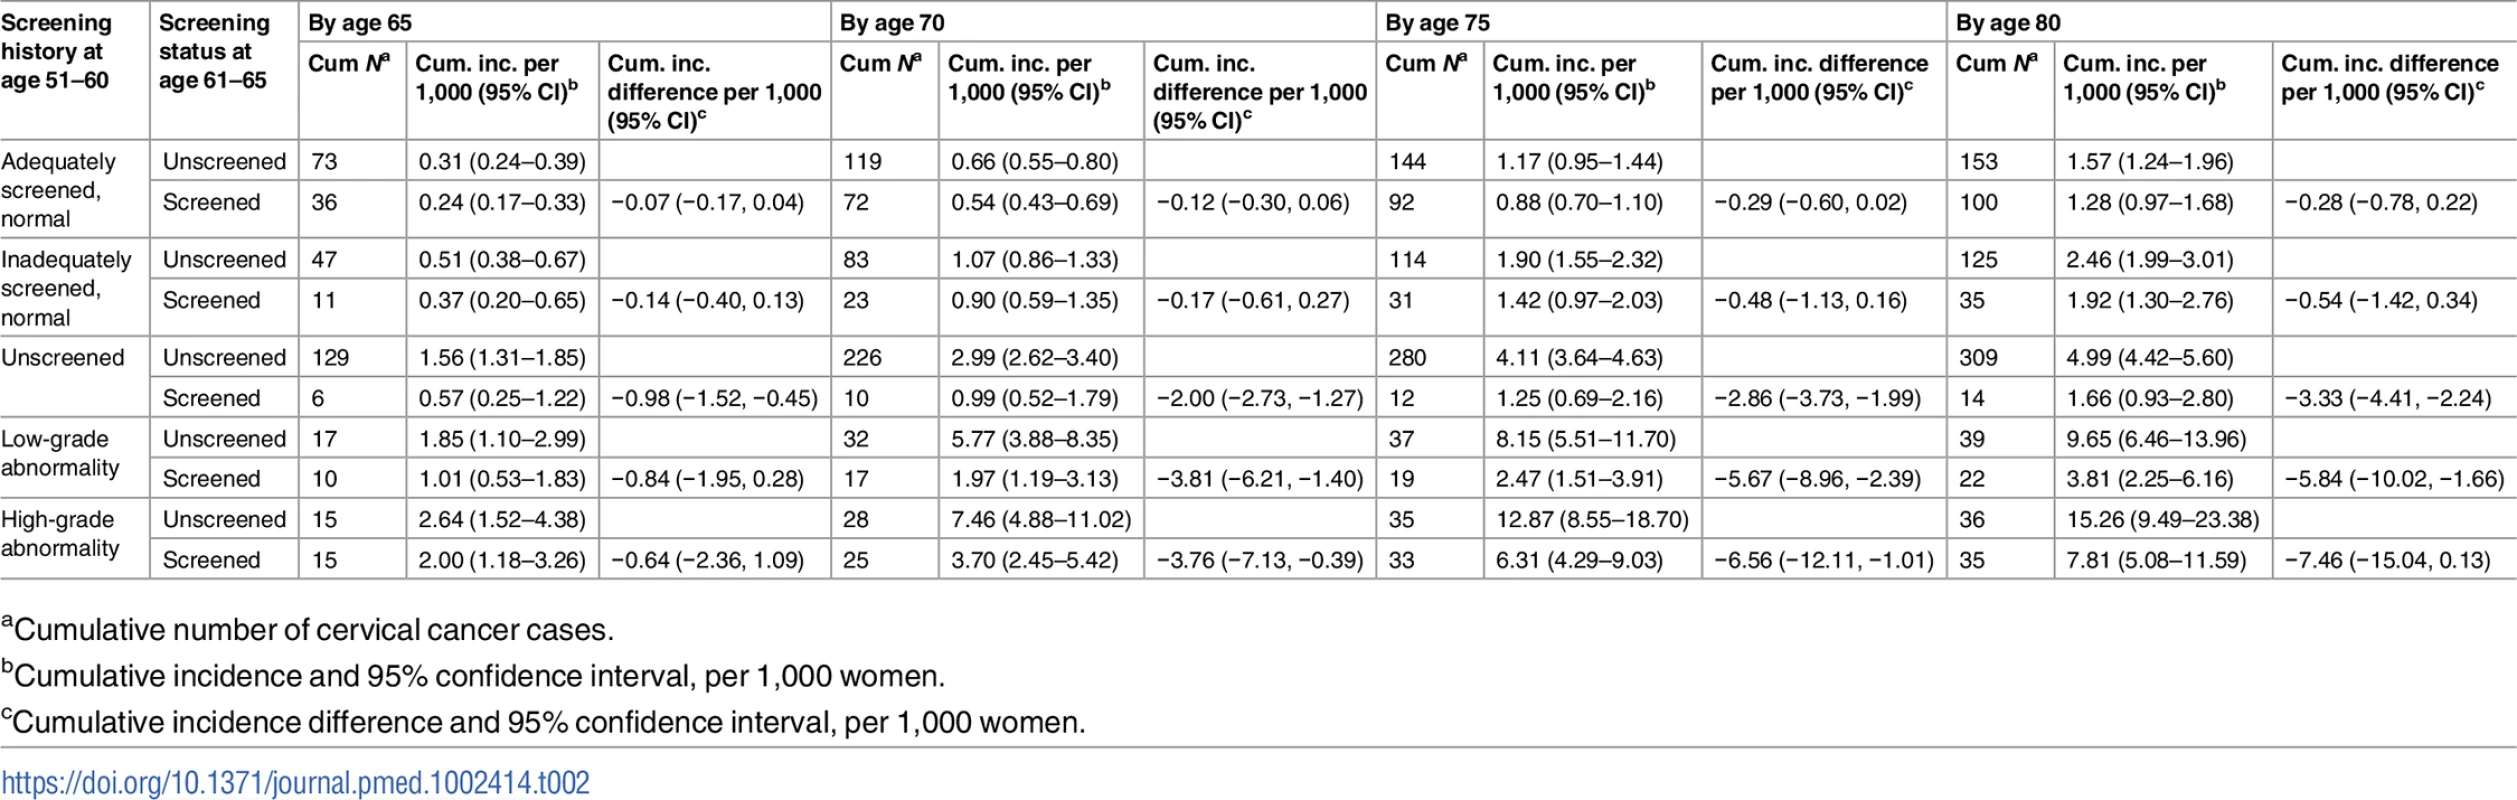 Number of cervical cancer cases, cumulative incidence, and cumulative incidence difference among women screened and unscreened at age 61–65, by screening history at age 51–60, for every 5 years of follow-up from age 61 to age 80, considering death and total hysterectomy as competing events.